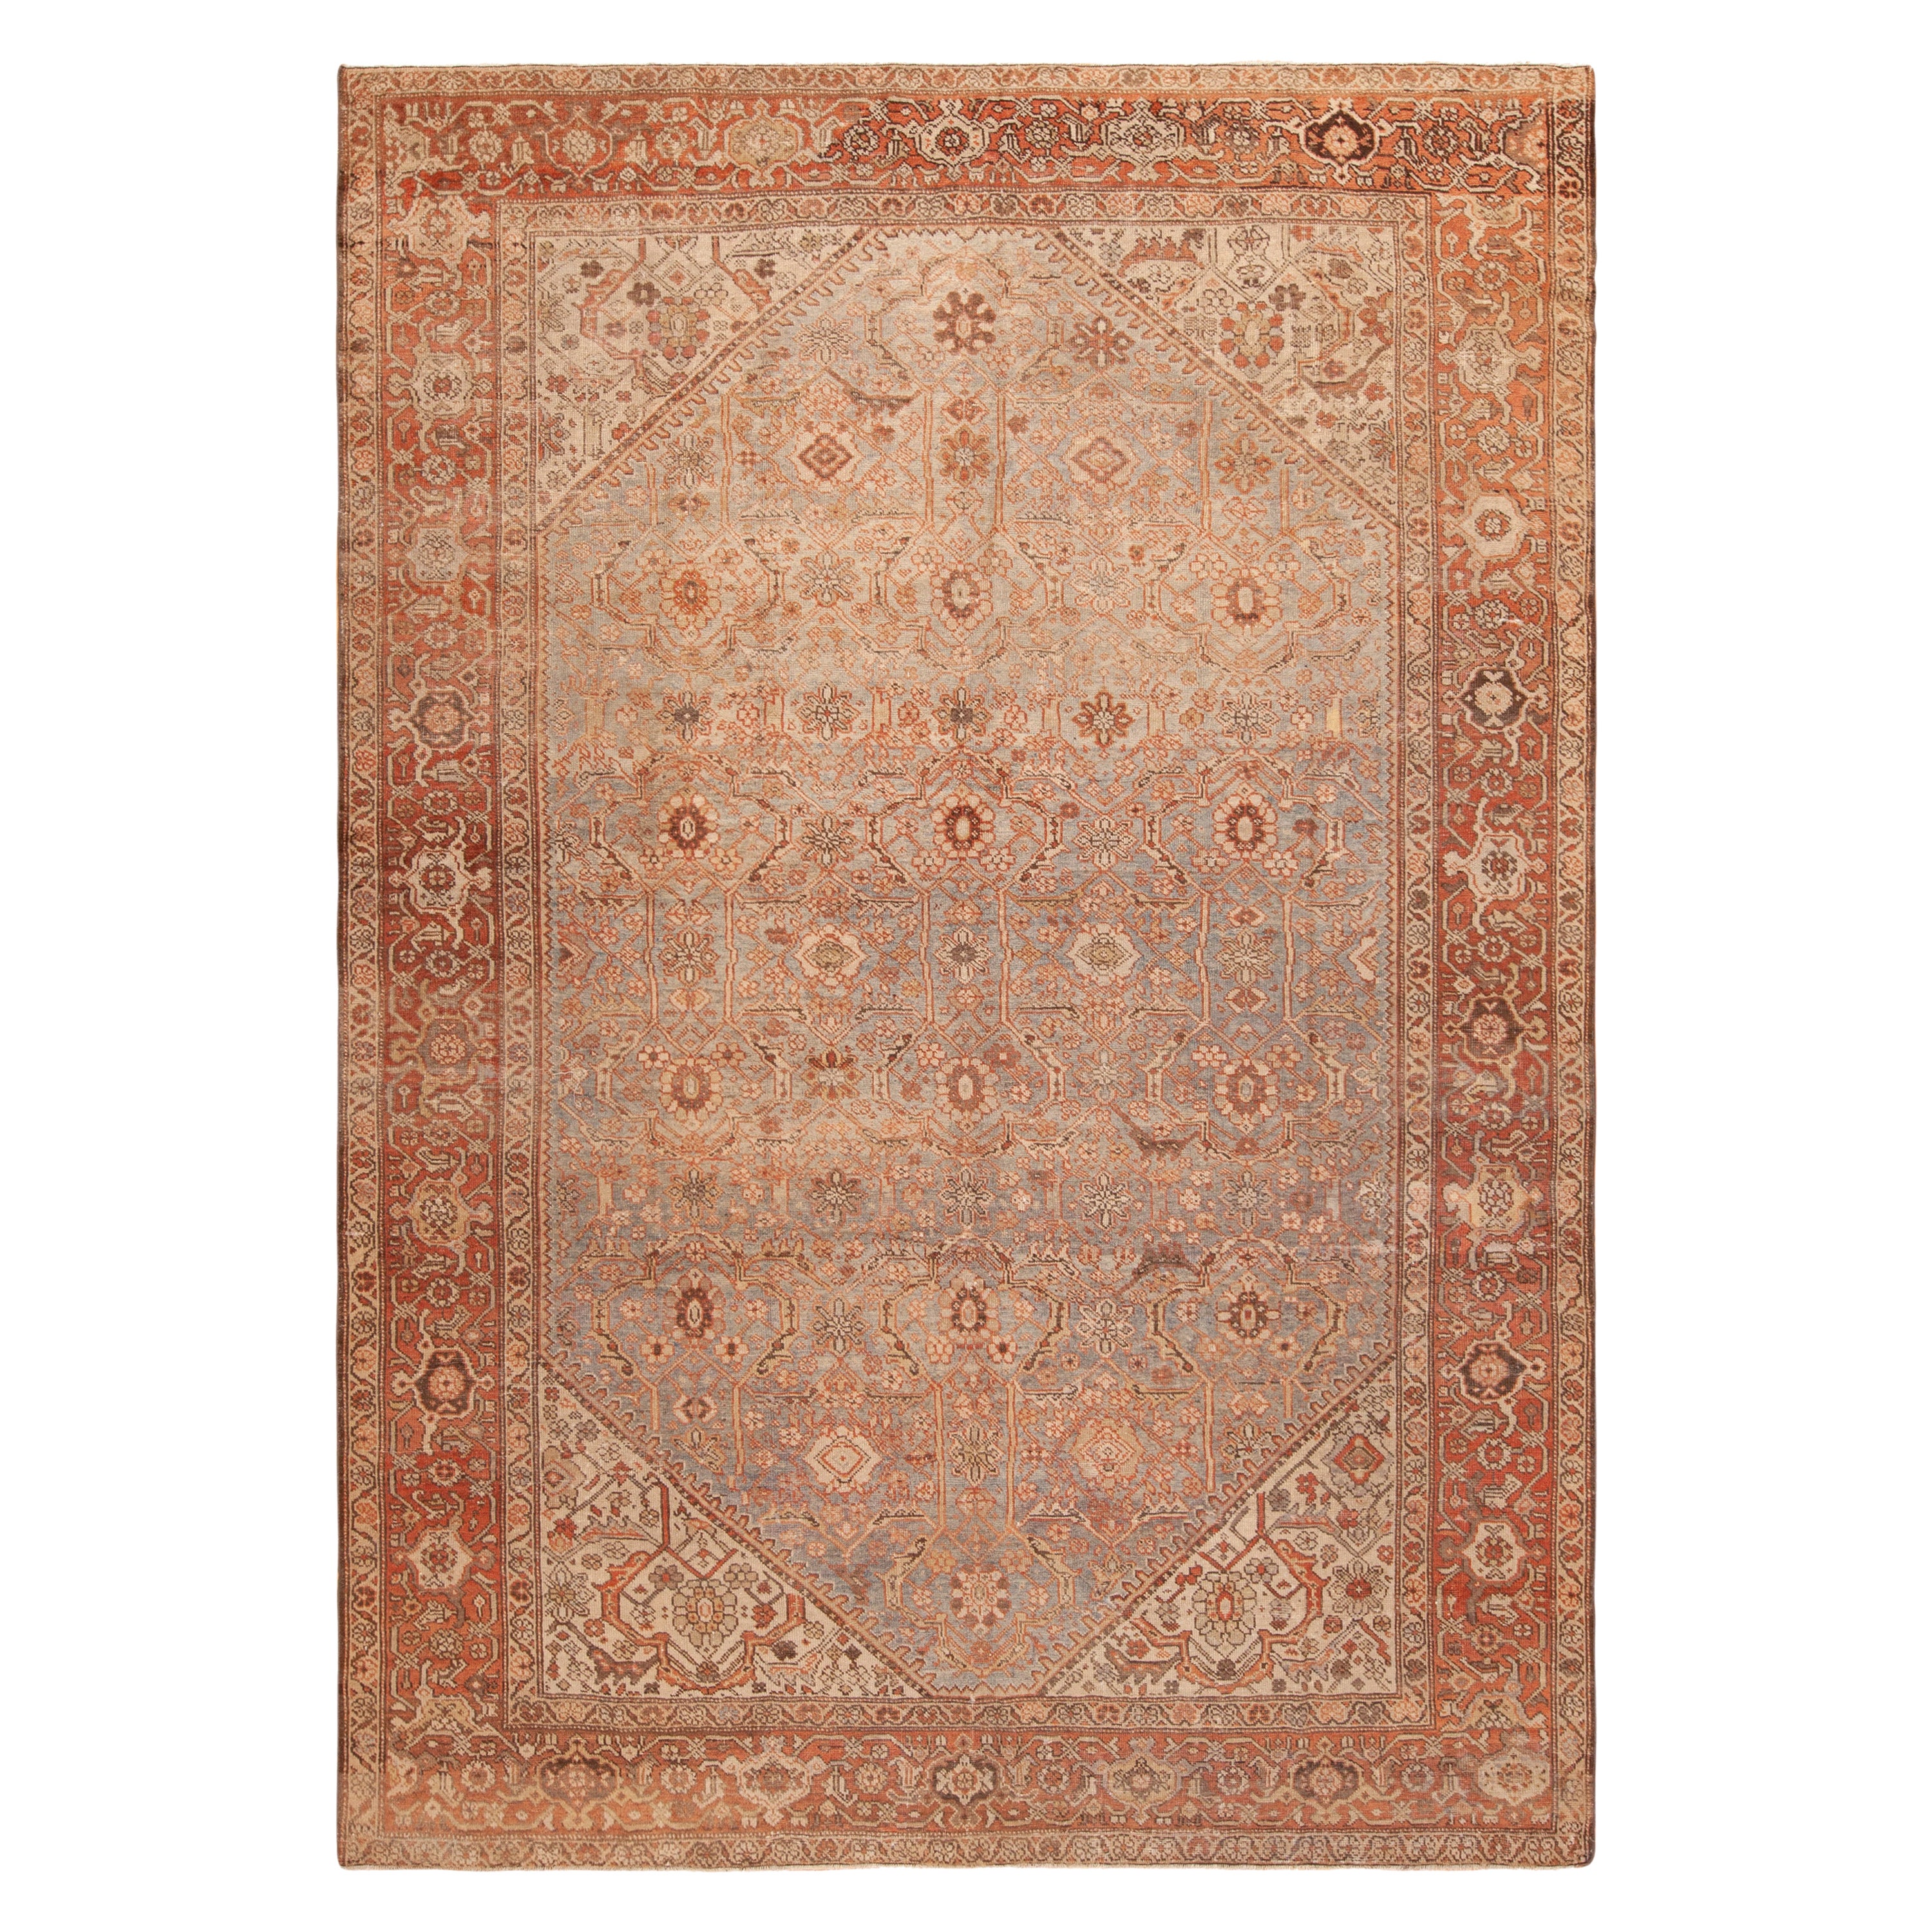 Extremely Impressive Antique Geometric Persian Sultanabad Rug 8'6" x 12' For Sale